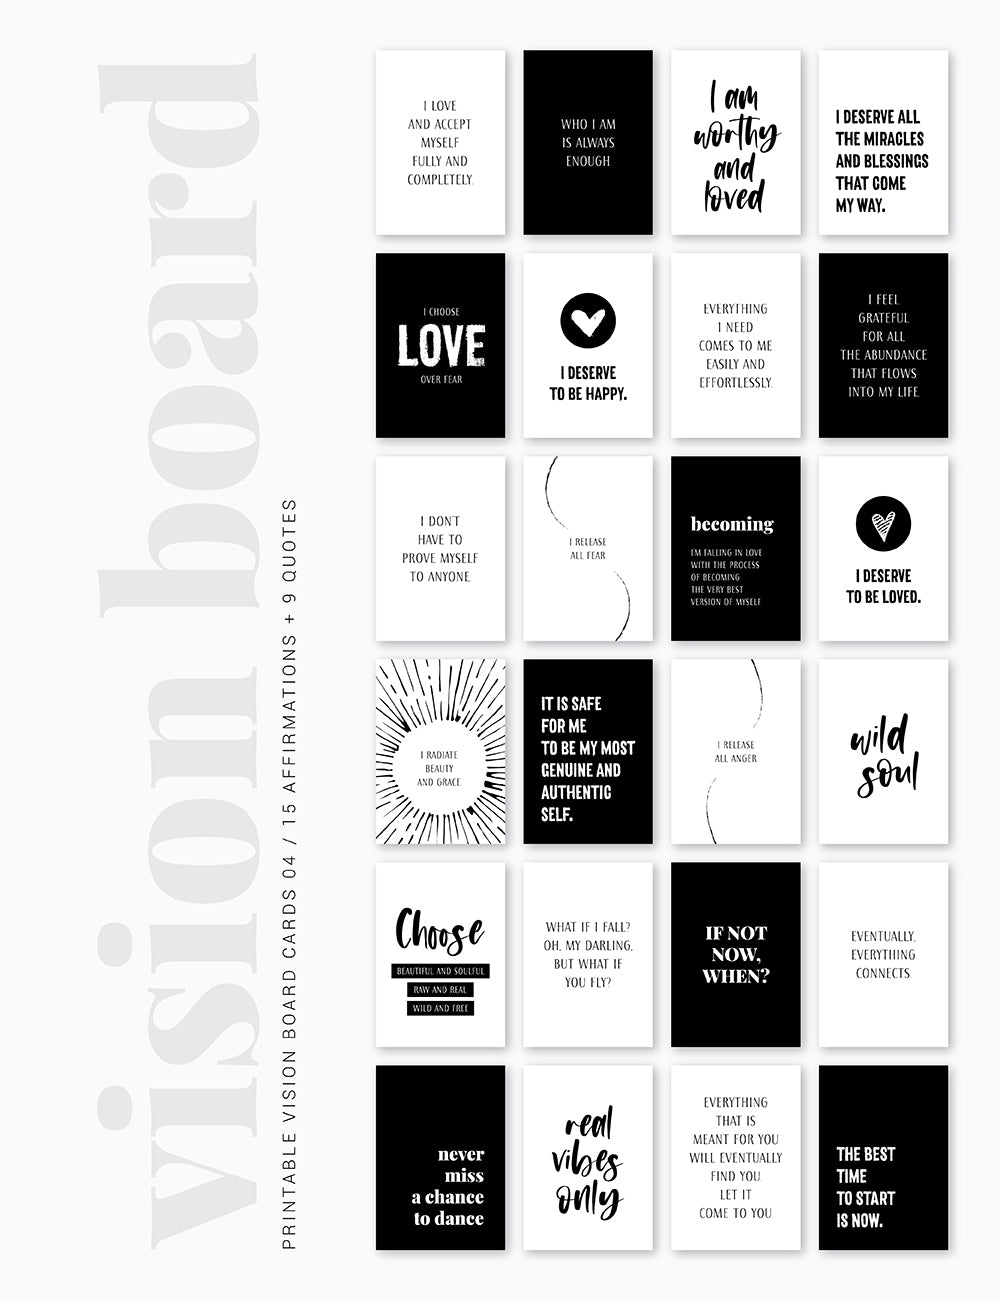 Vision Board Printables | Printable Vision Board Kit | Printable Affirmation Cards | Insprational & Motivational Quotes | Printable Quotes | Printable Journal & Planner Cards | 3.5x5 | 3x4 | 2x3 | PDF + JPEG | Planner Printables | Planner Accessories | Black and White | Clean Design | Minimal Aesthetic